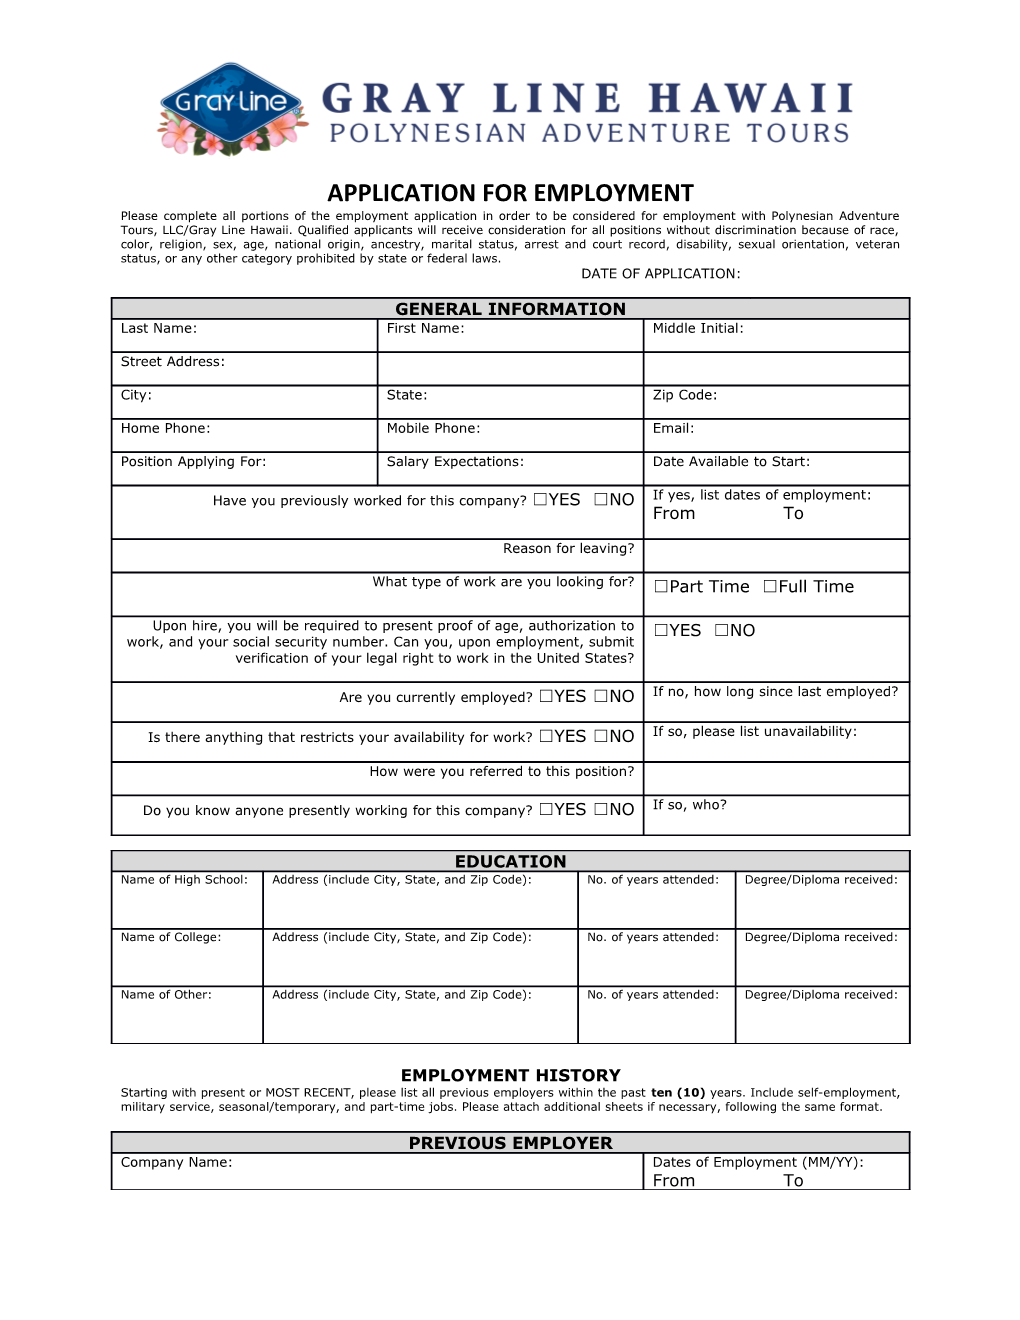 Application for Employment s68